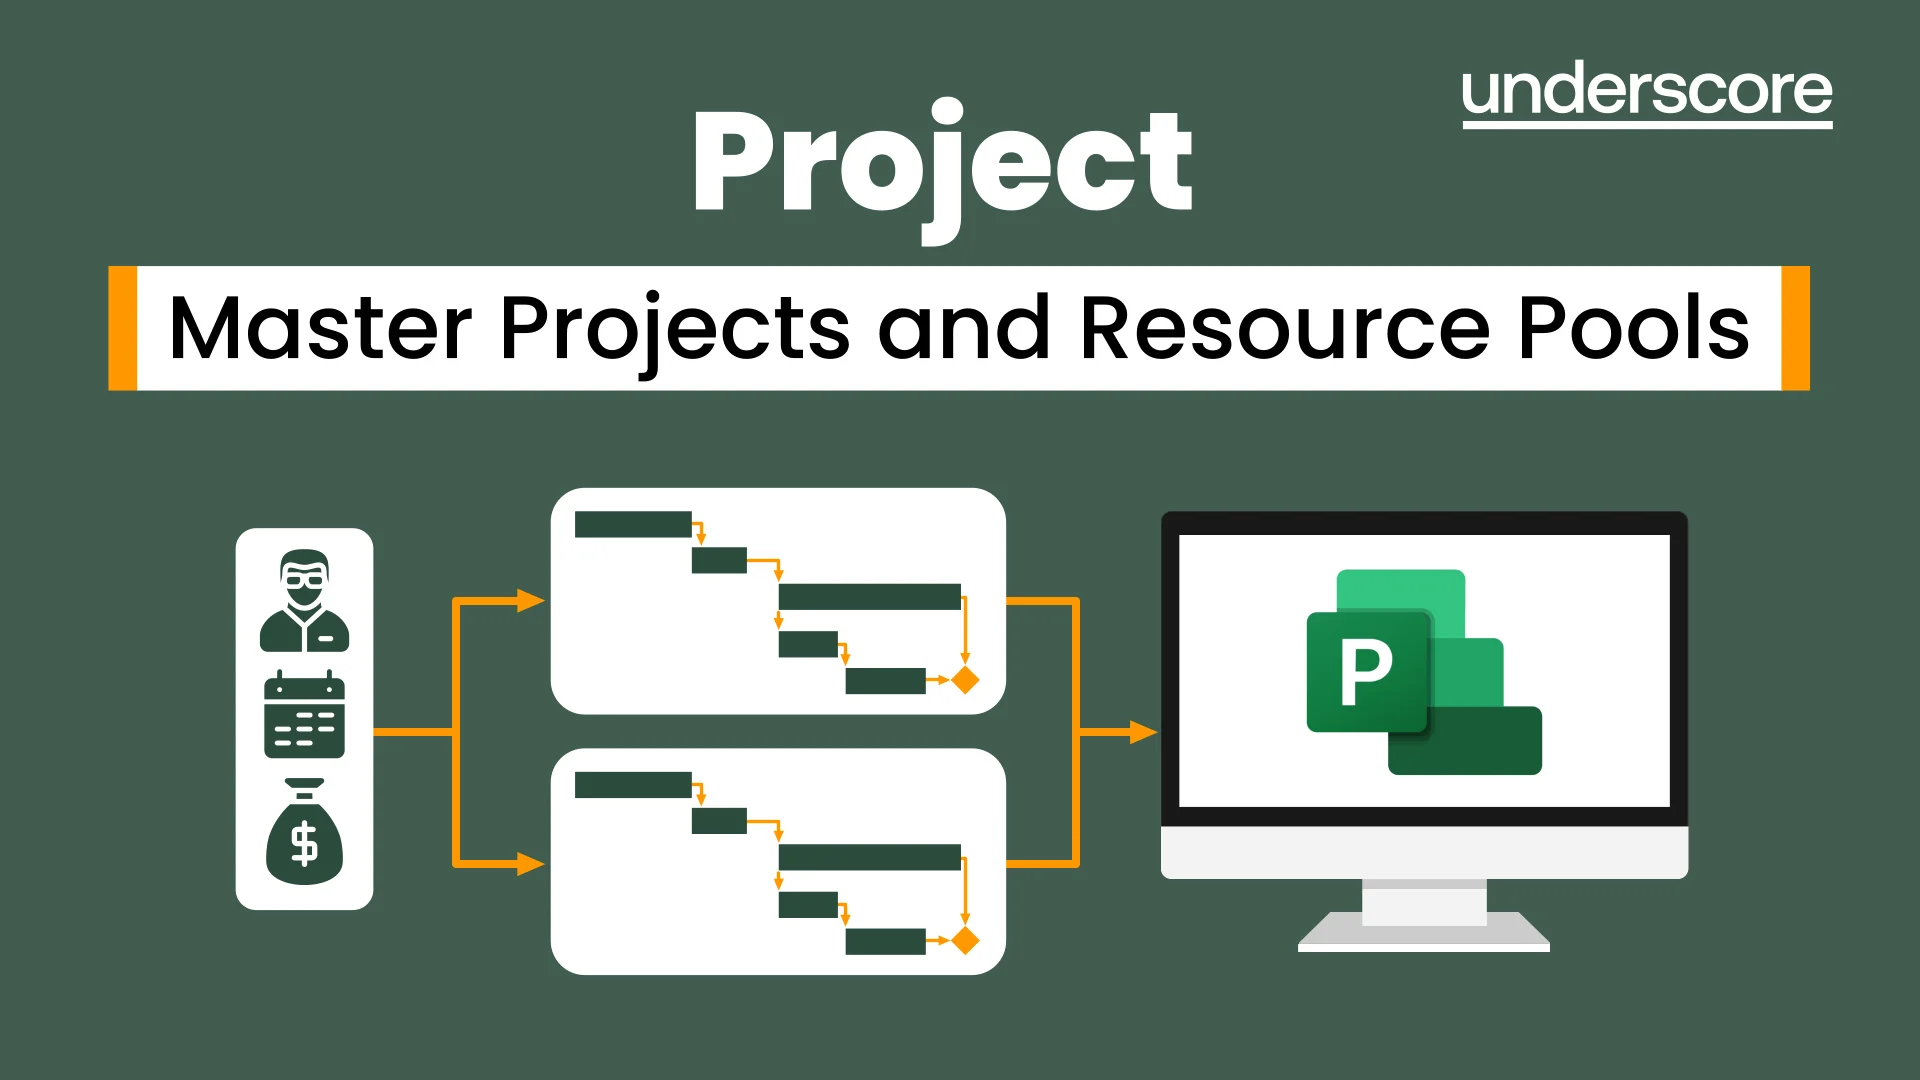 Master Projects and Resource Pools